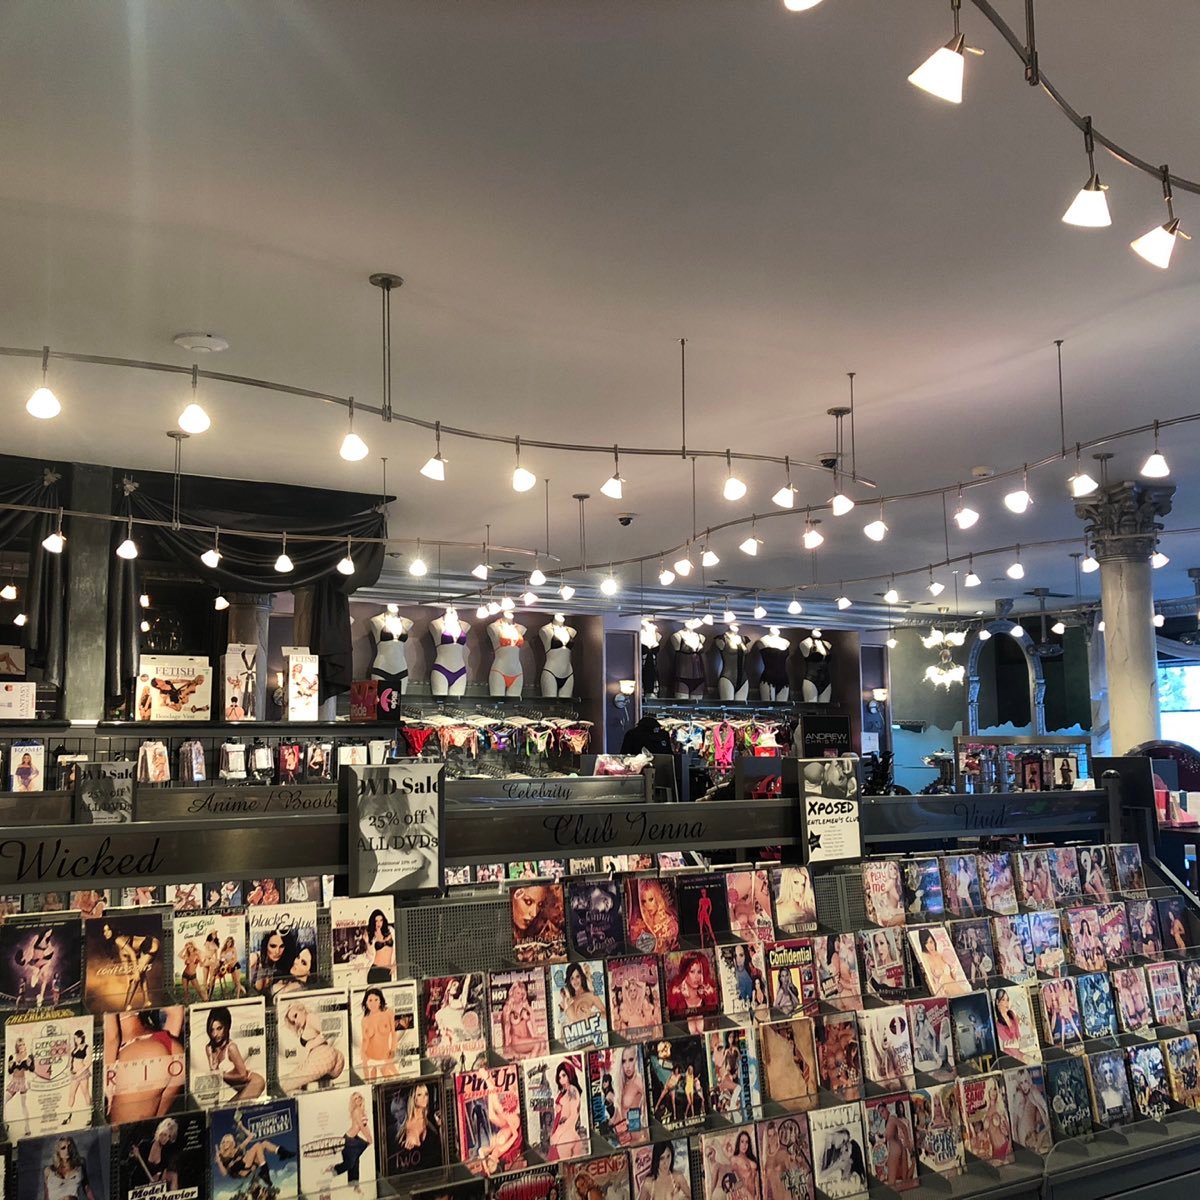 The best in lingerie, sex toys, adult merch, and more! Visit us today at 8223 Canoga Avenue, Canoga Park CA. (Canoga/Roscoe). Look for the Exposed Club sign!